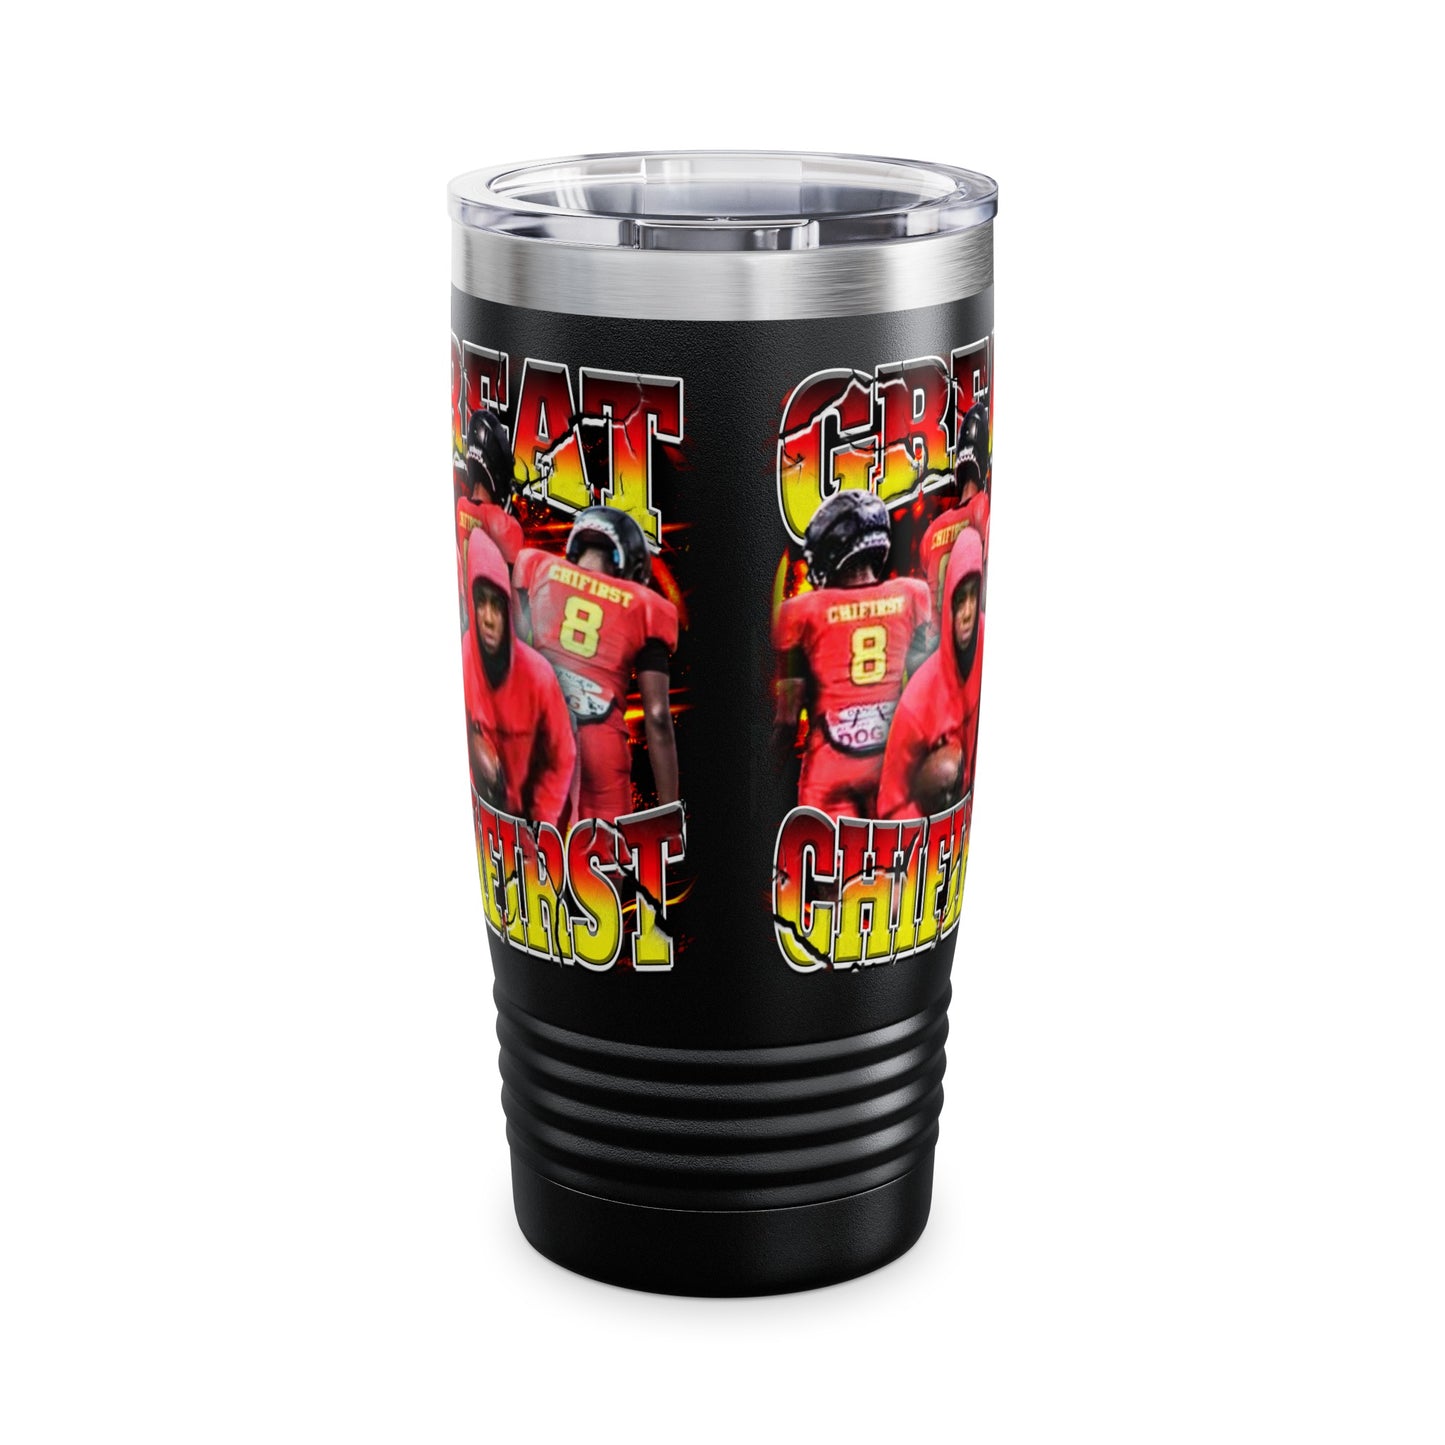 Great Chifirst Stainless Steal Tumbler